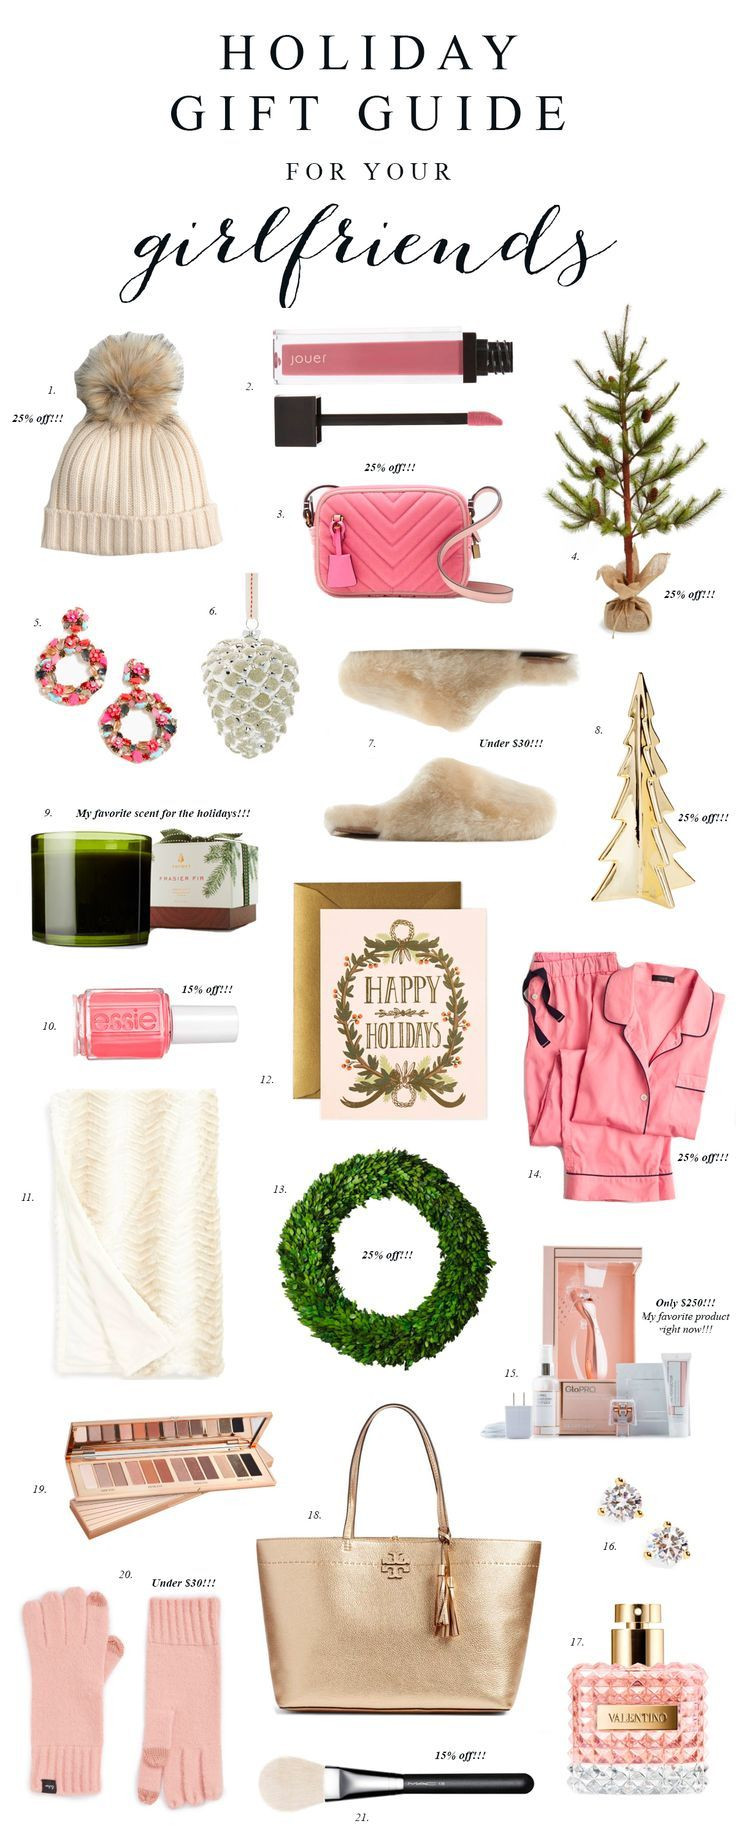 Cool Gift Ideas For Girlfriends
 Gift Guide For Your Girlfriends